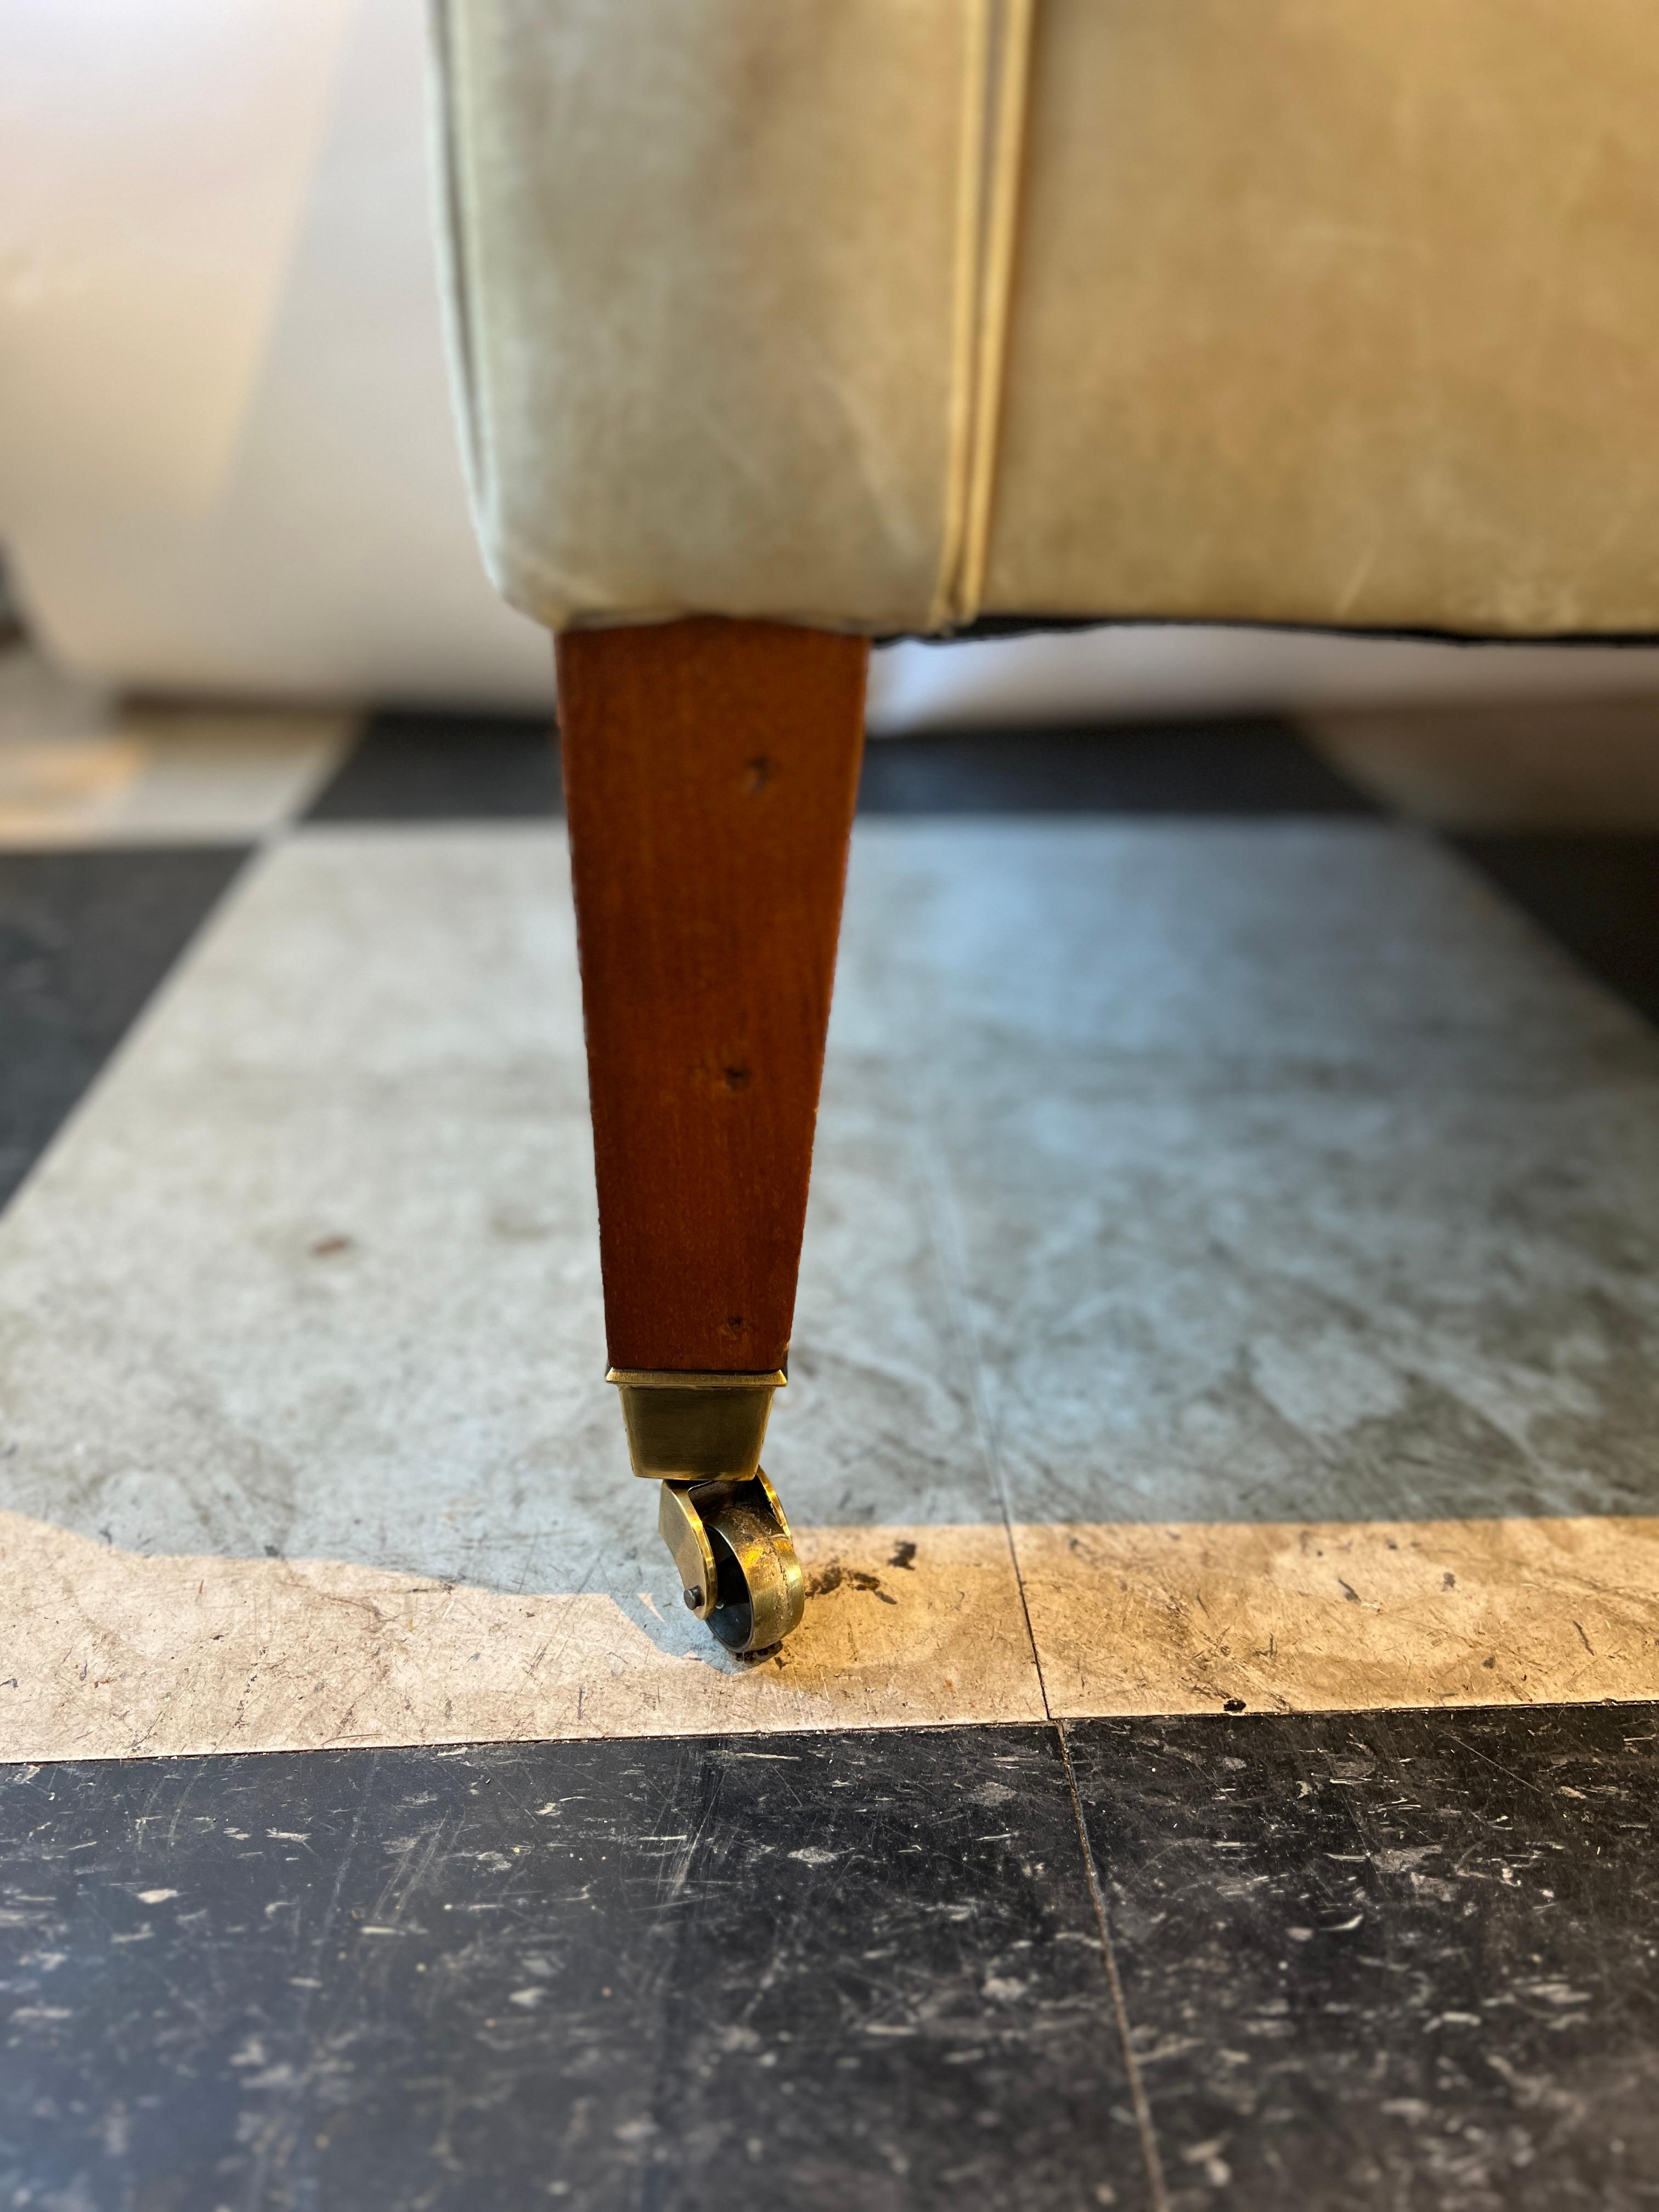 Ralph Lauren leather couch on brass casters for Henredon. Foam and 50% down cushions. Leather beautifully faded from the sun. The sun has turned the leather into different shades of tan.  On the left side of the couch there looks like there is a